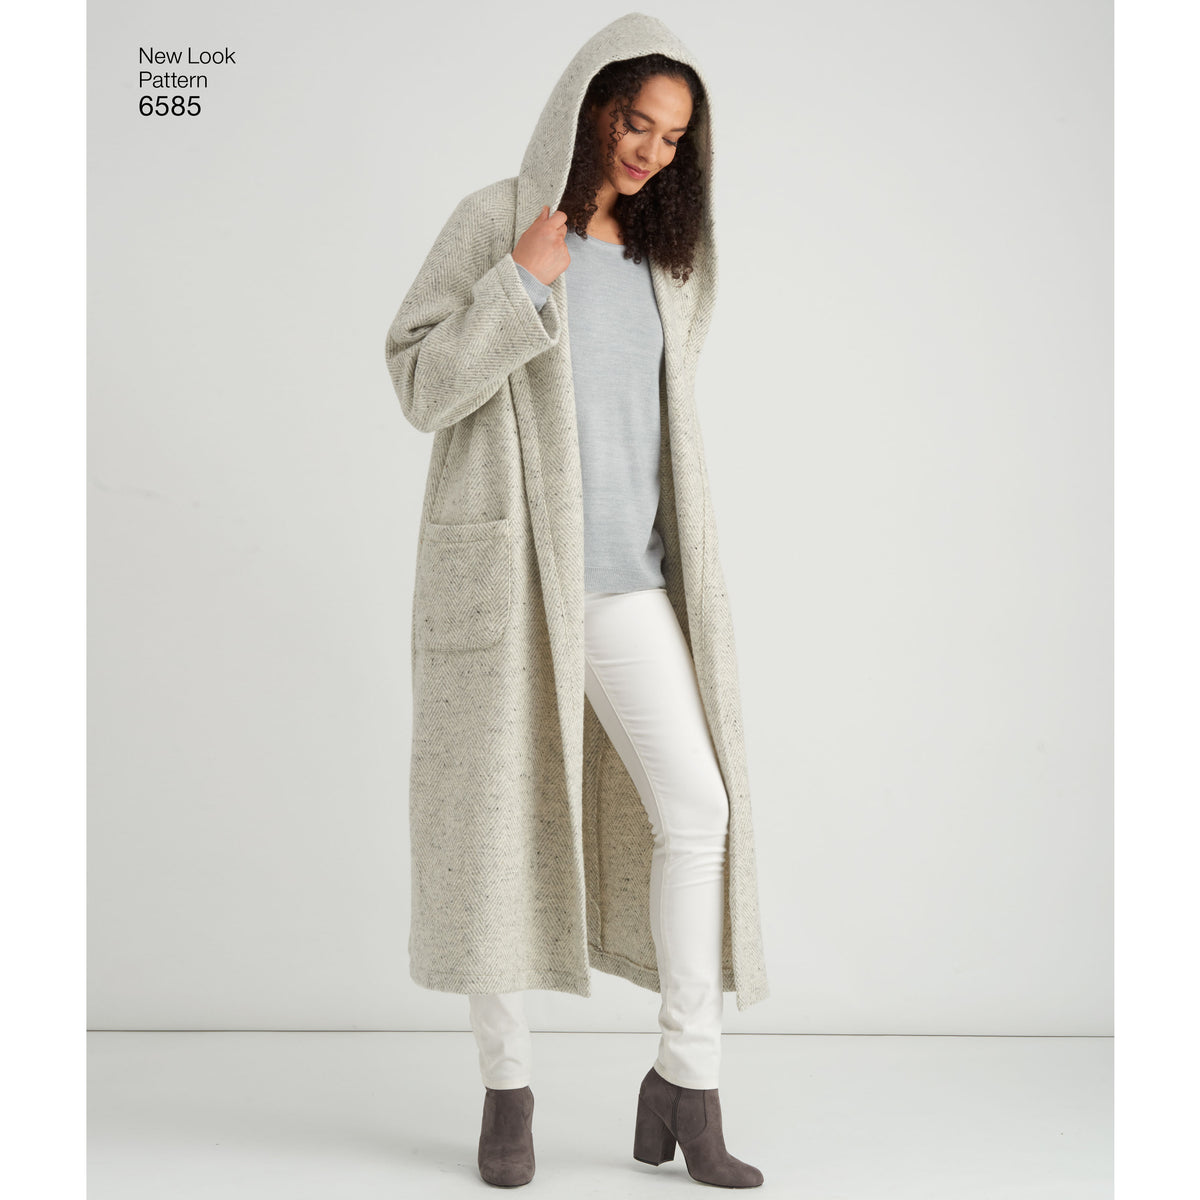 6585 New Look Pattern 6585 Misses' Coat with Hood